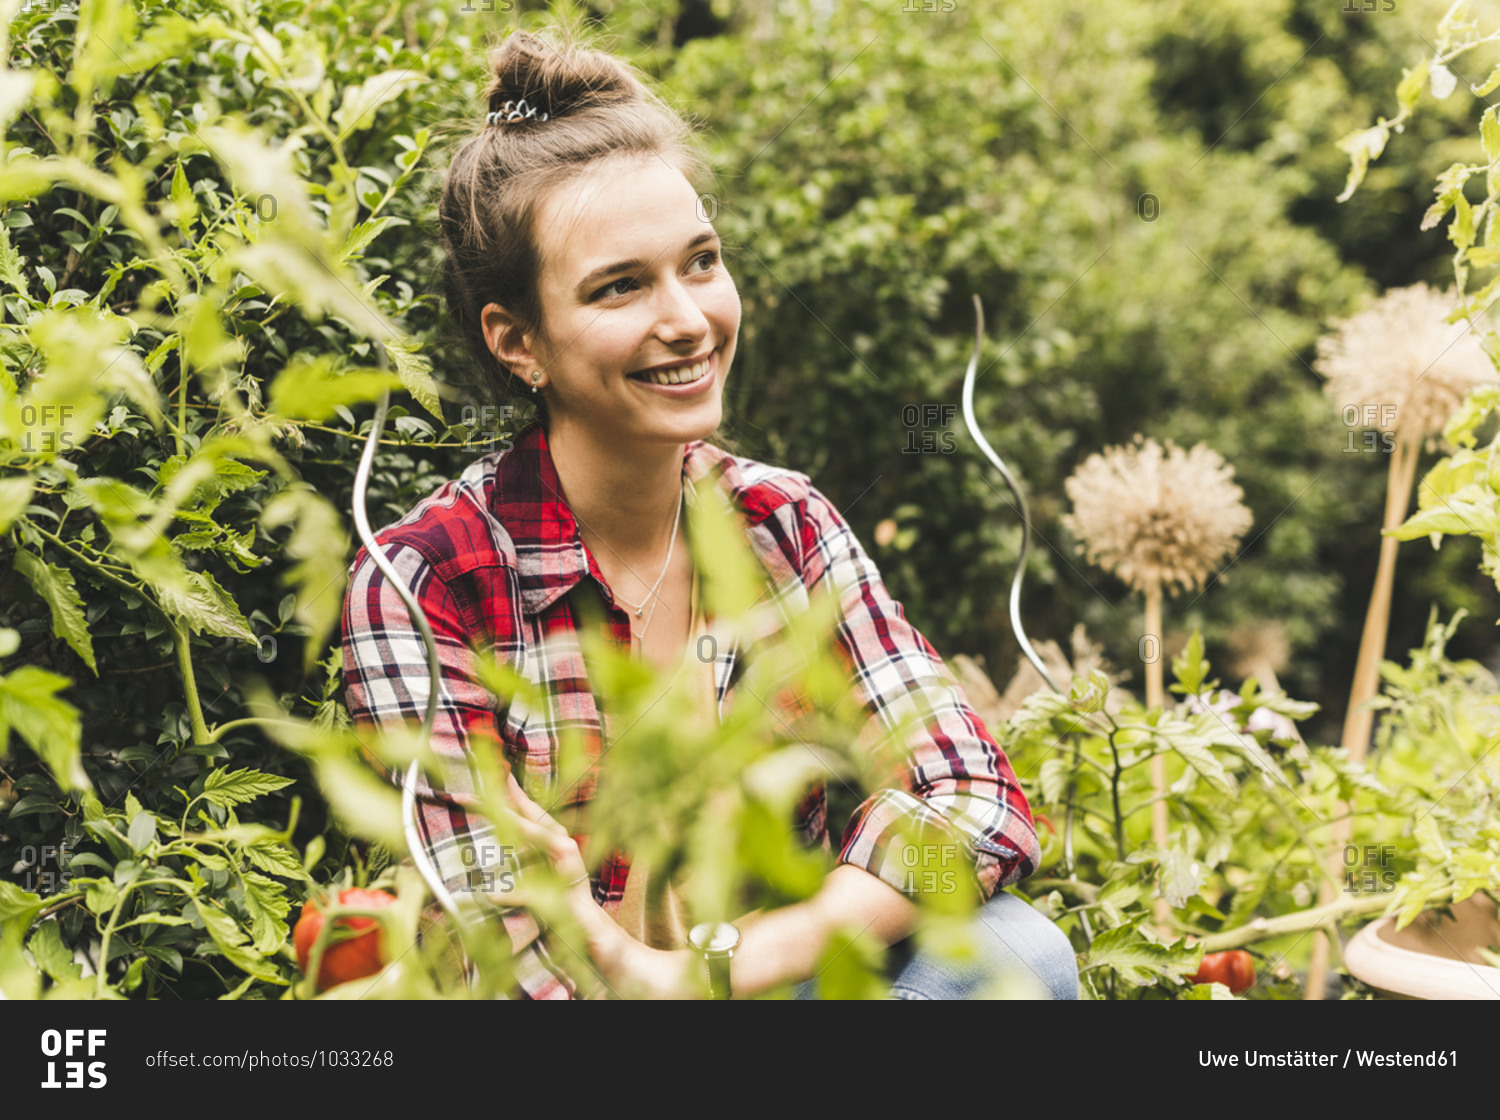 Smiling young woman looking away while sitting amidst plants in vegetable garden